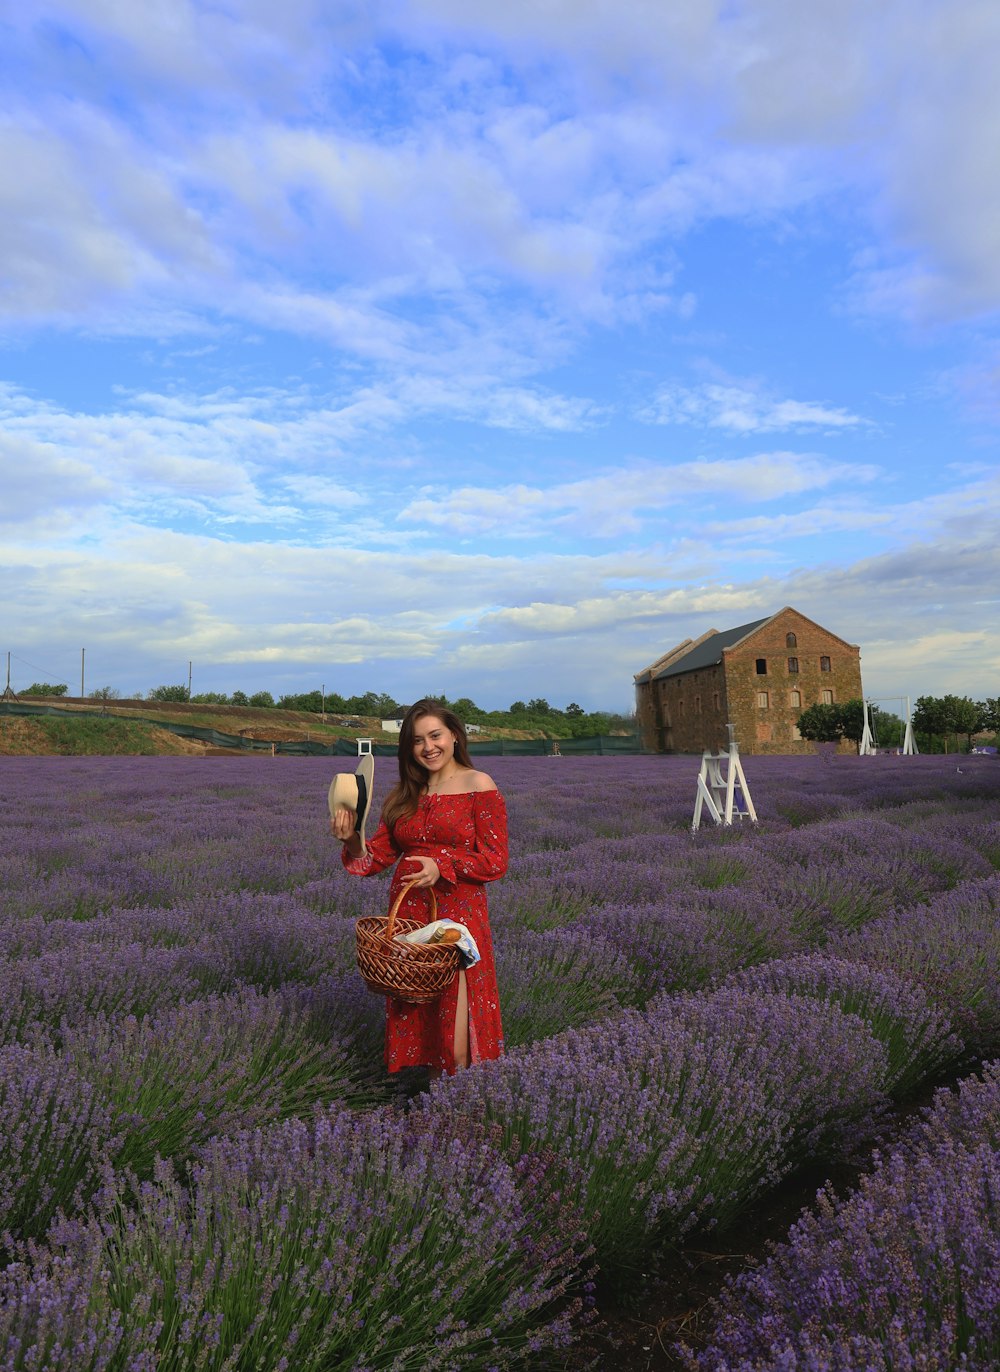 a woman in a red dress standing in a lavender field